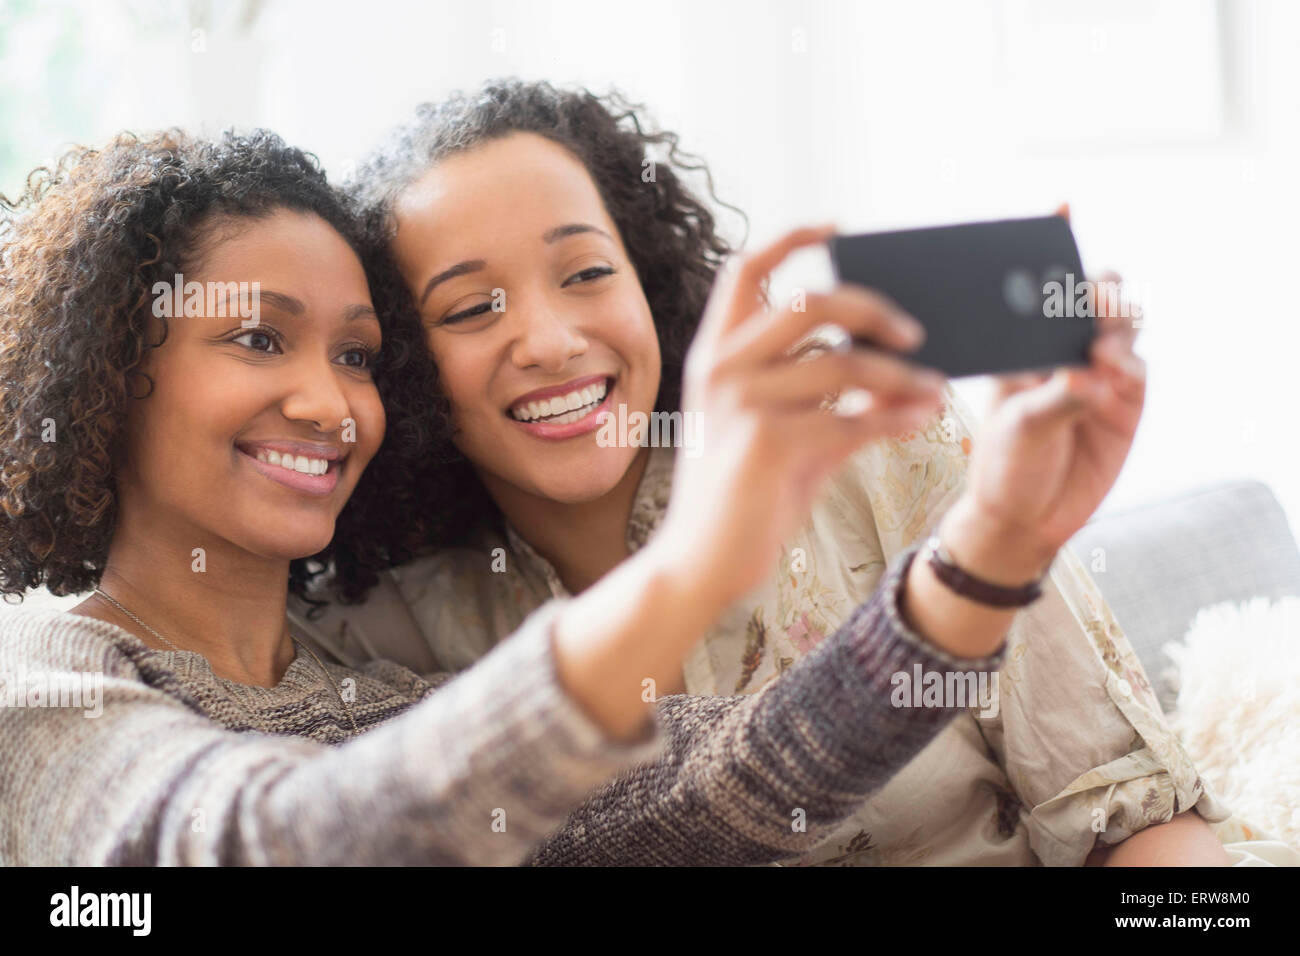 Smiling women taking cell phone photograph Stock Photo